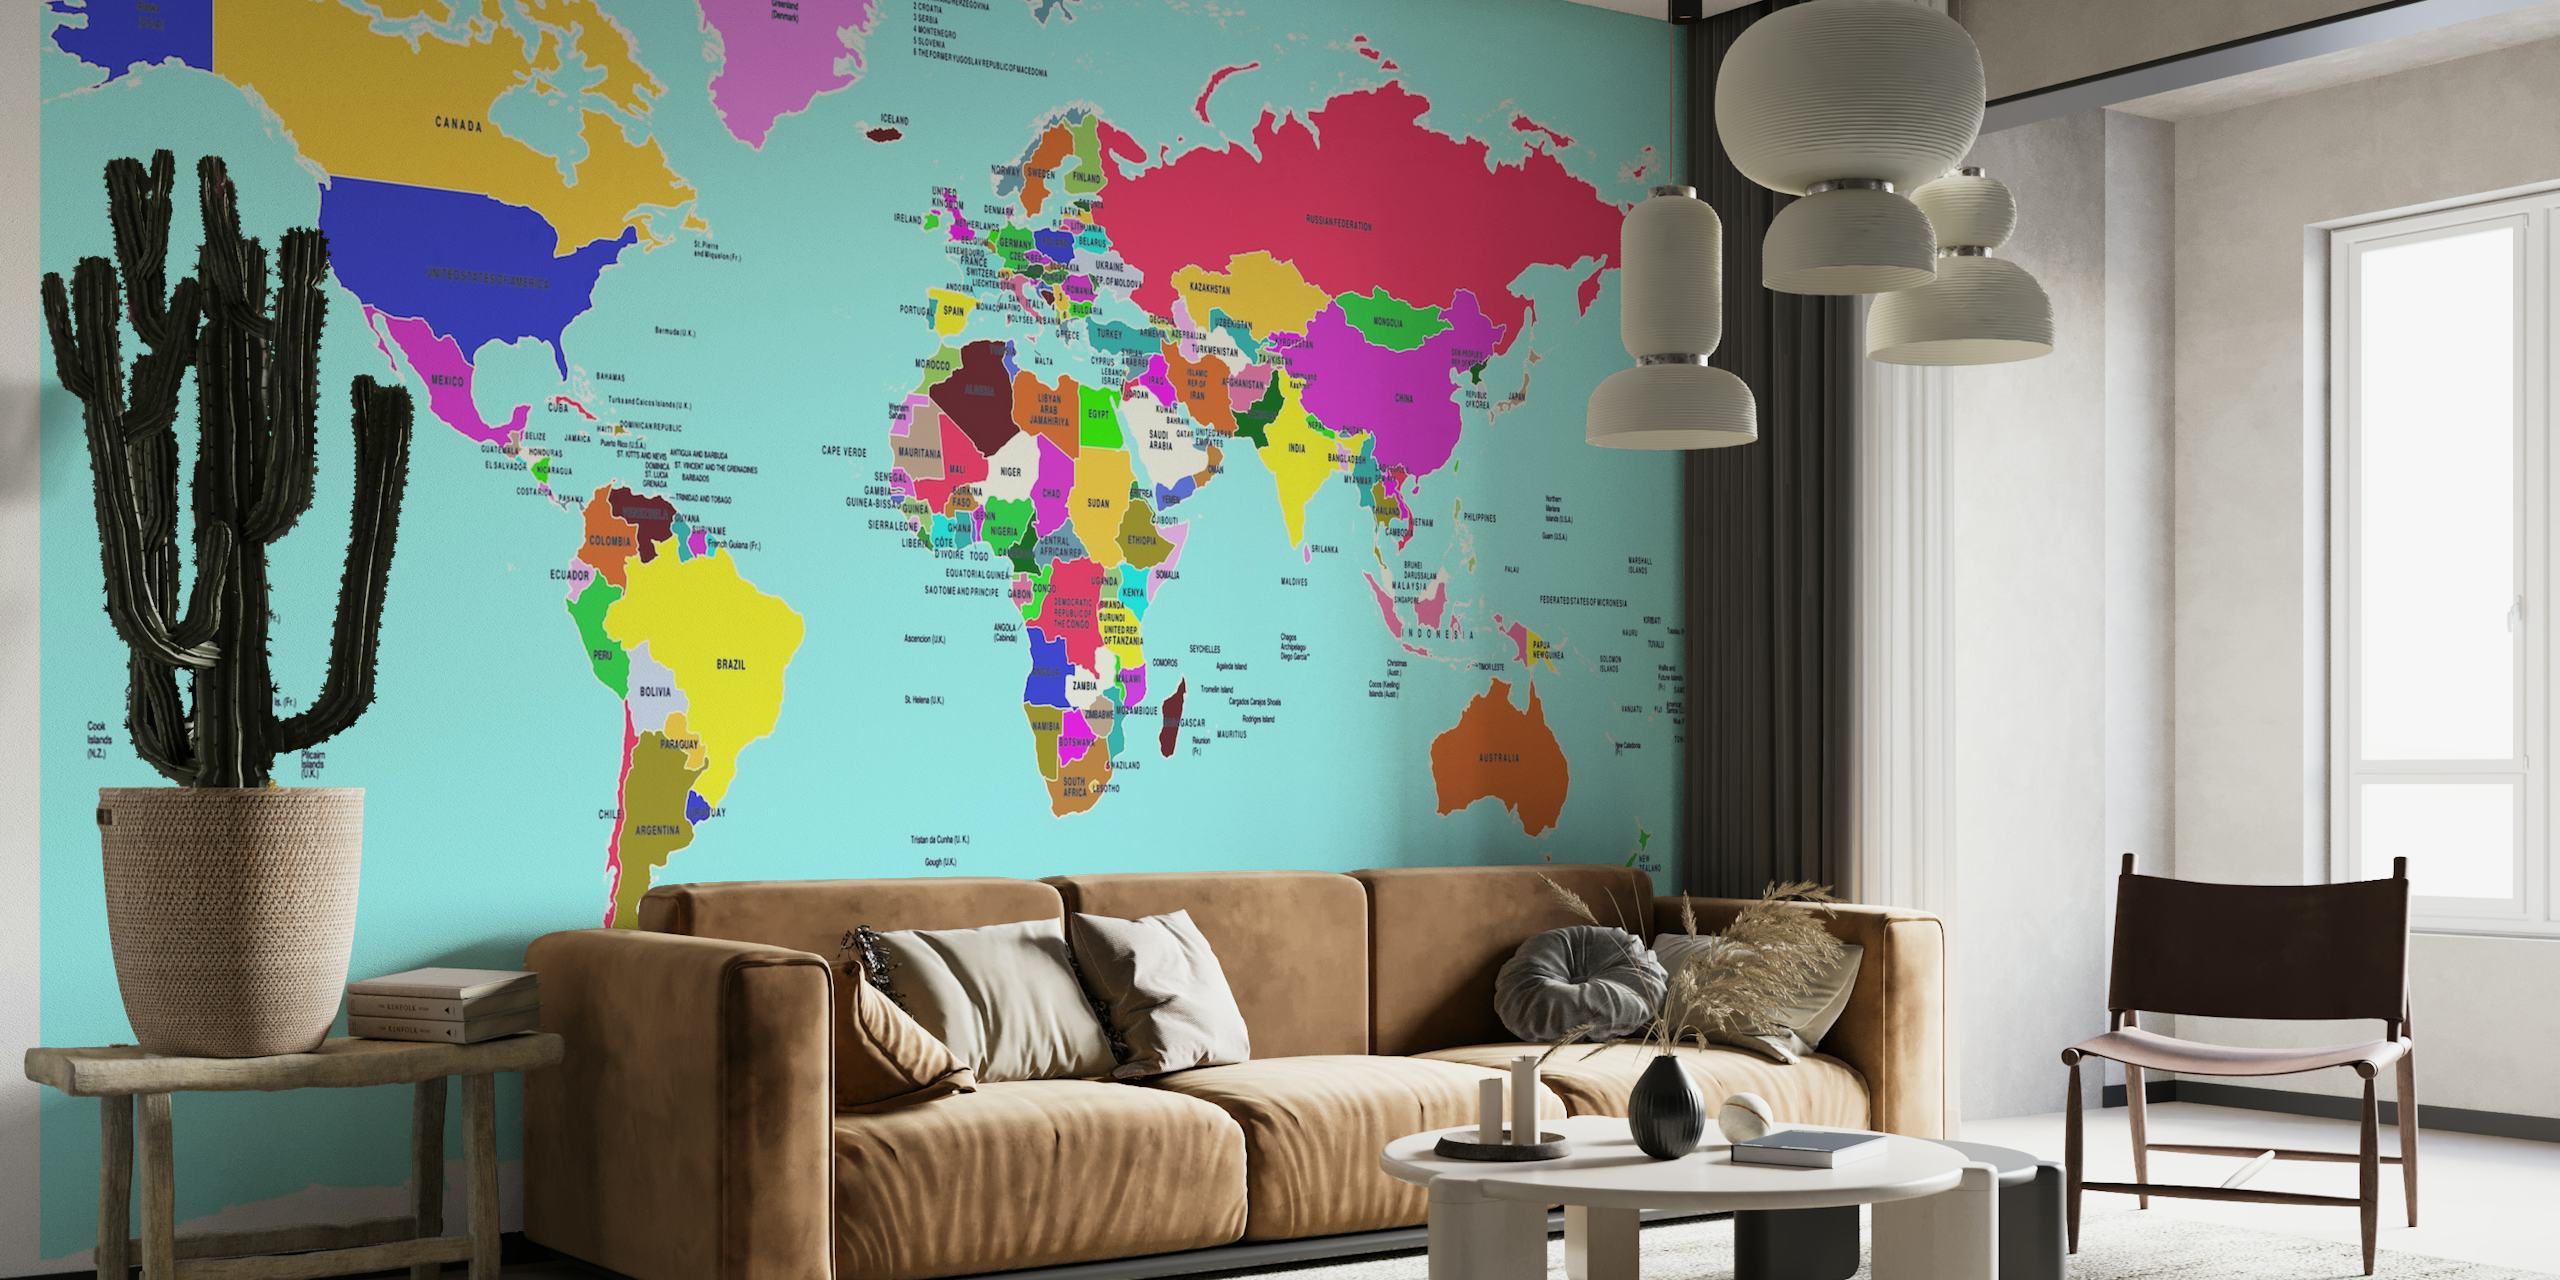 Countries In The World wallpaper